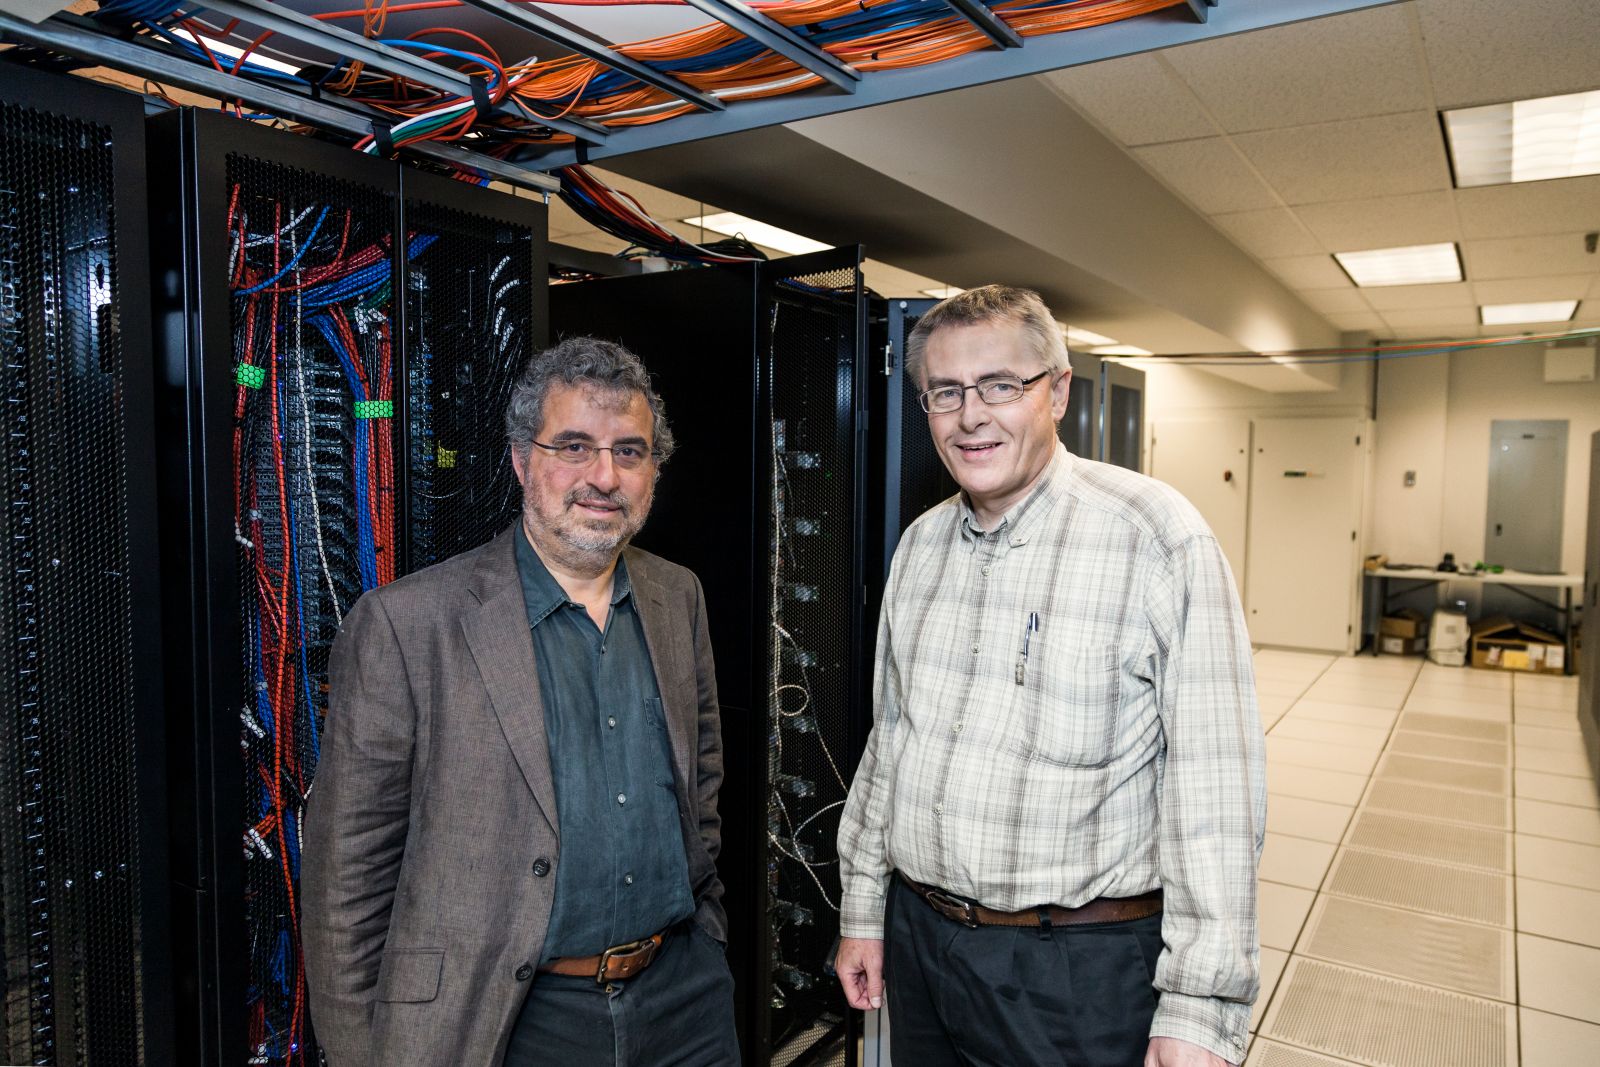 Queen's researchers working with the High Performance Computing Virtual Laboratory